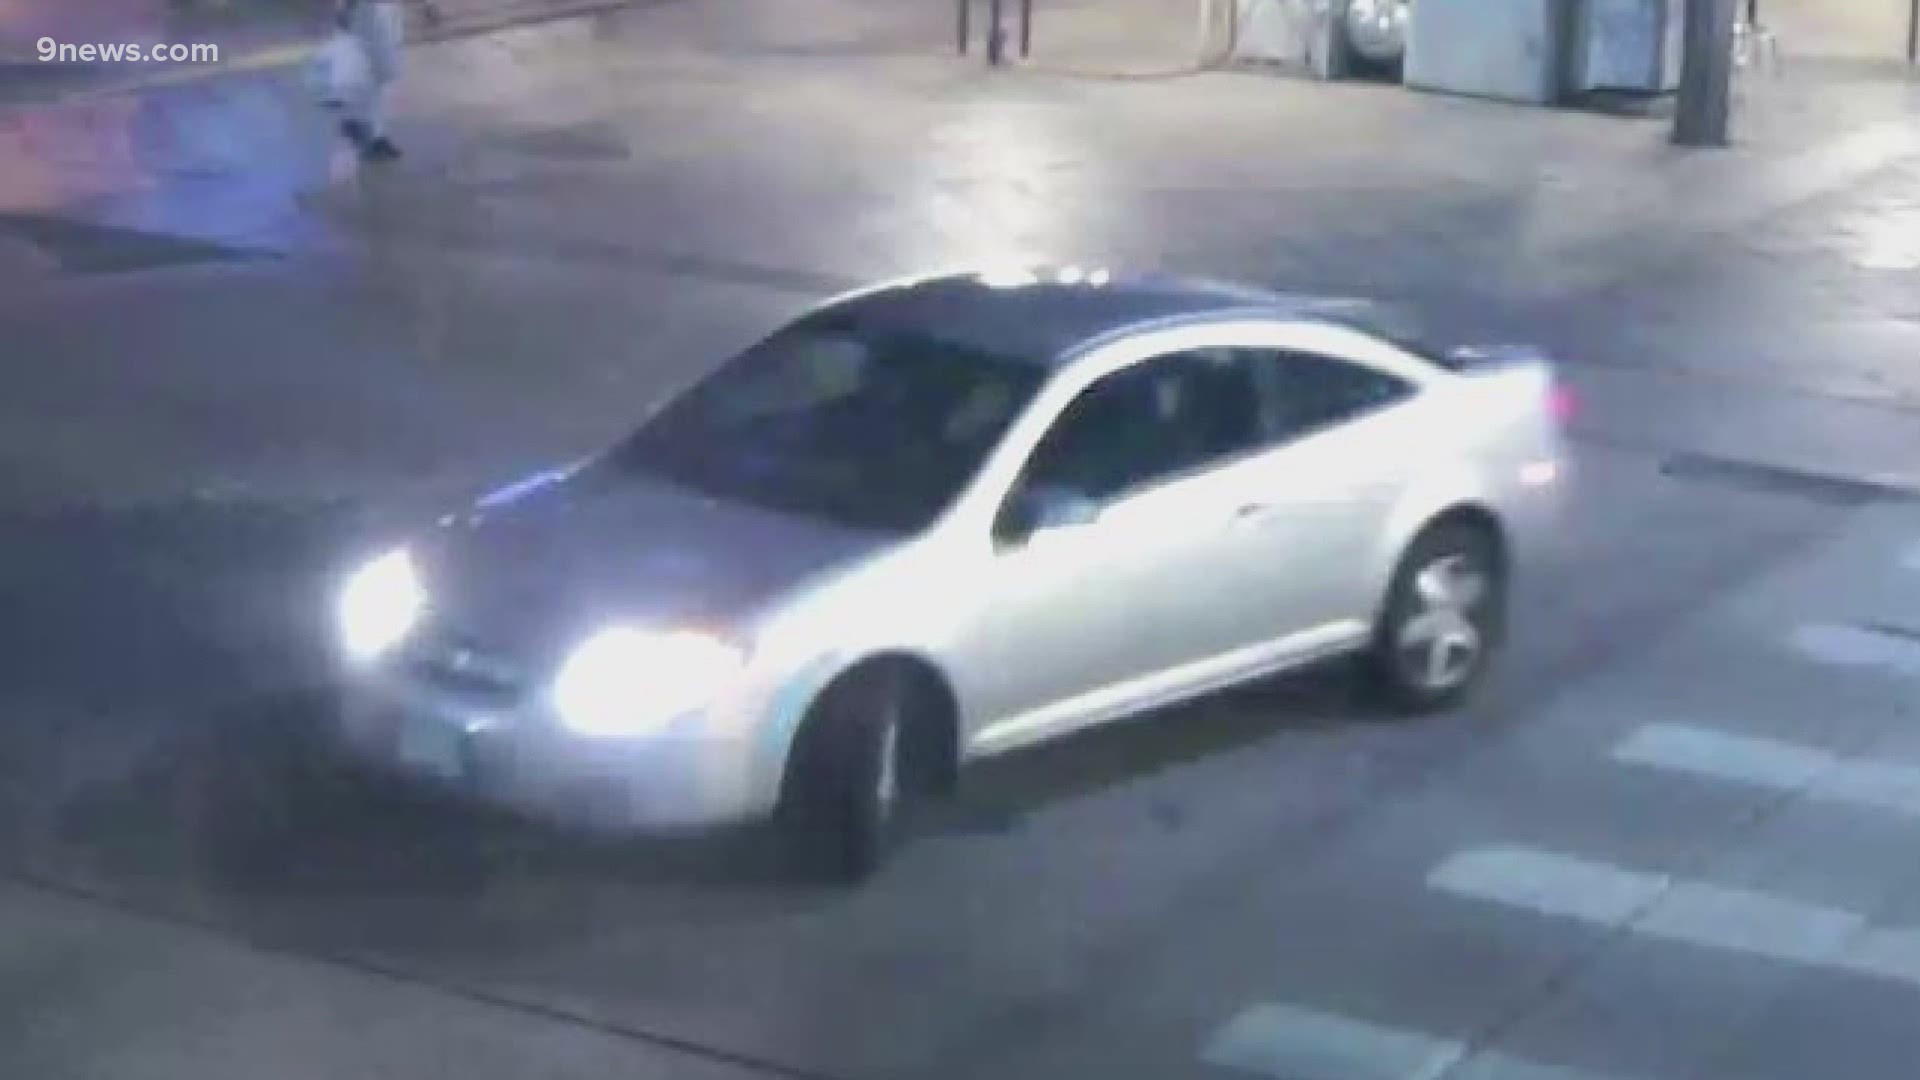 Police are looking for a 2005-2010 silver Chevrolet Cobalt in relation to the crash.